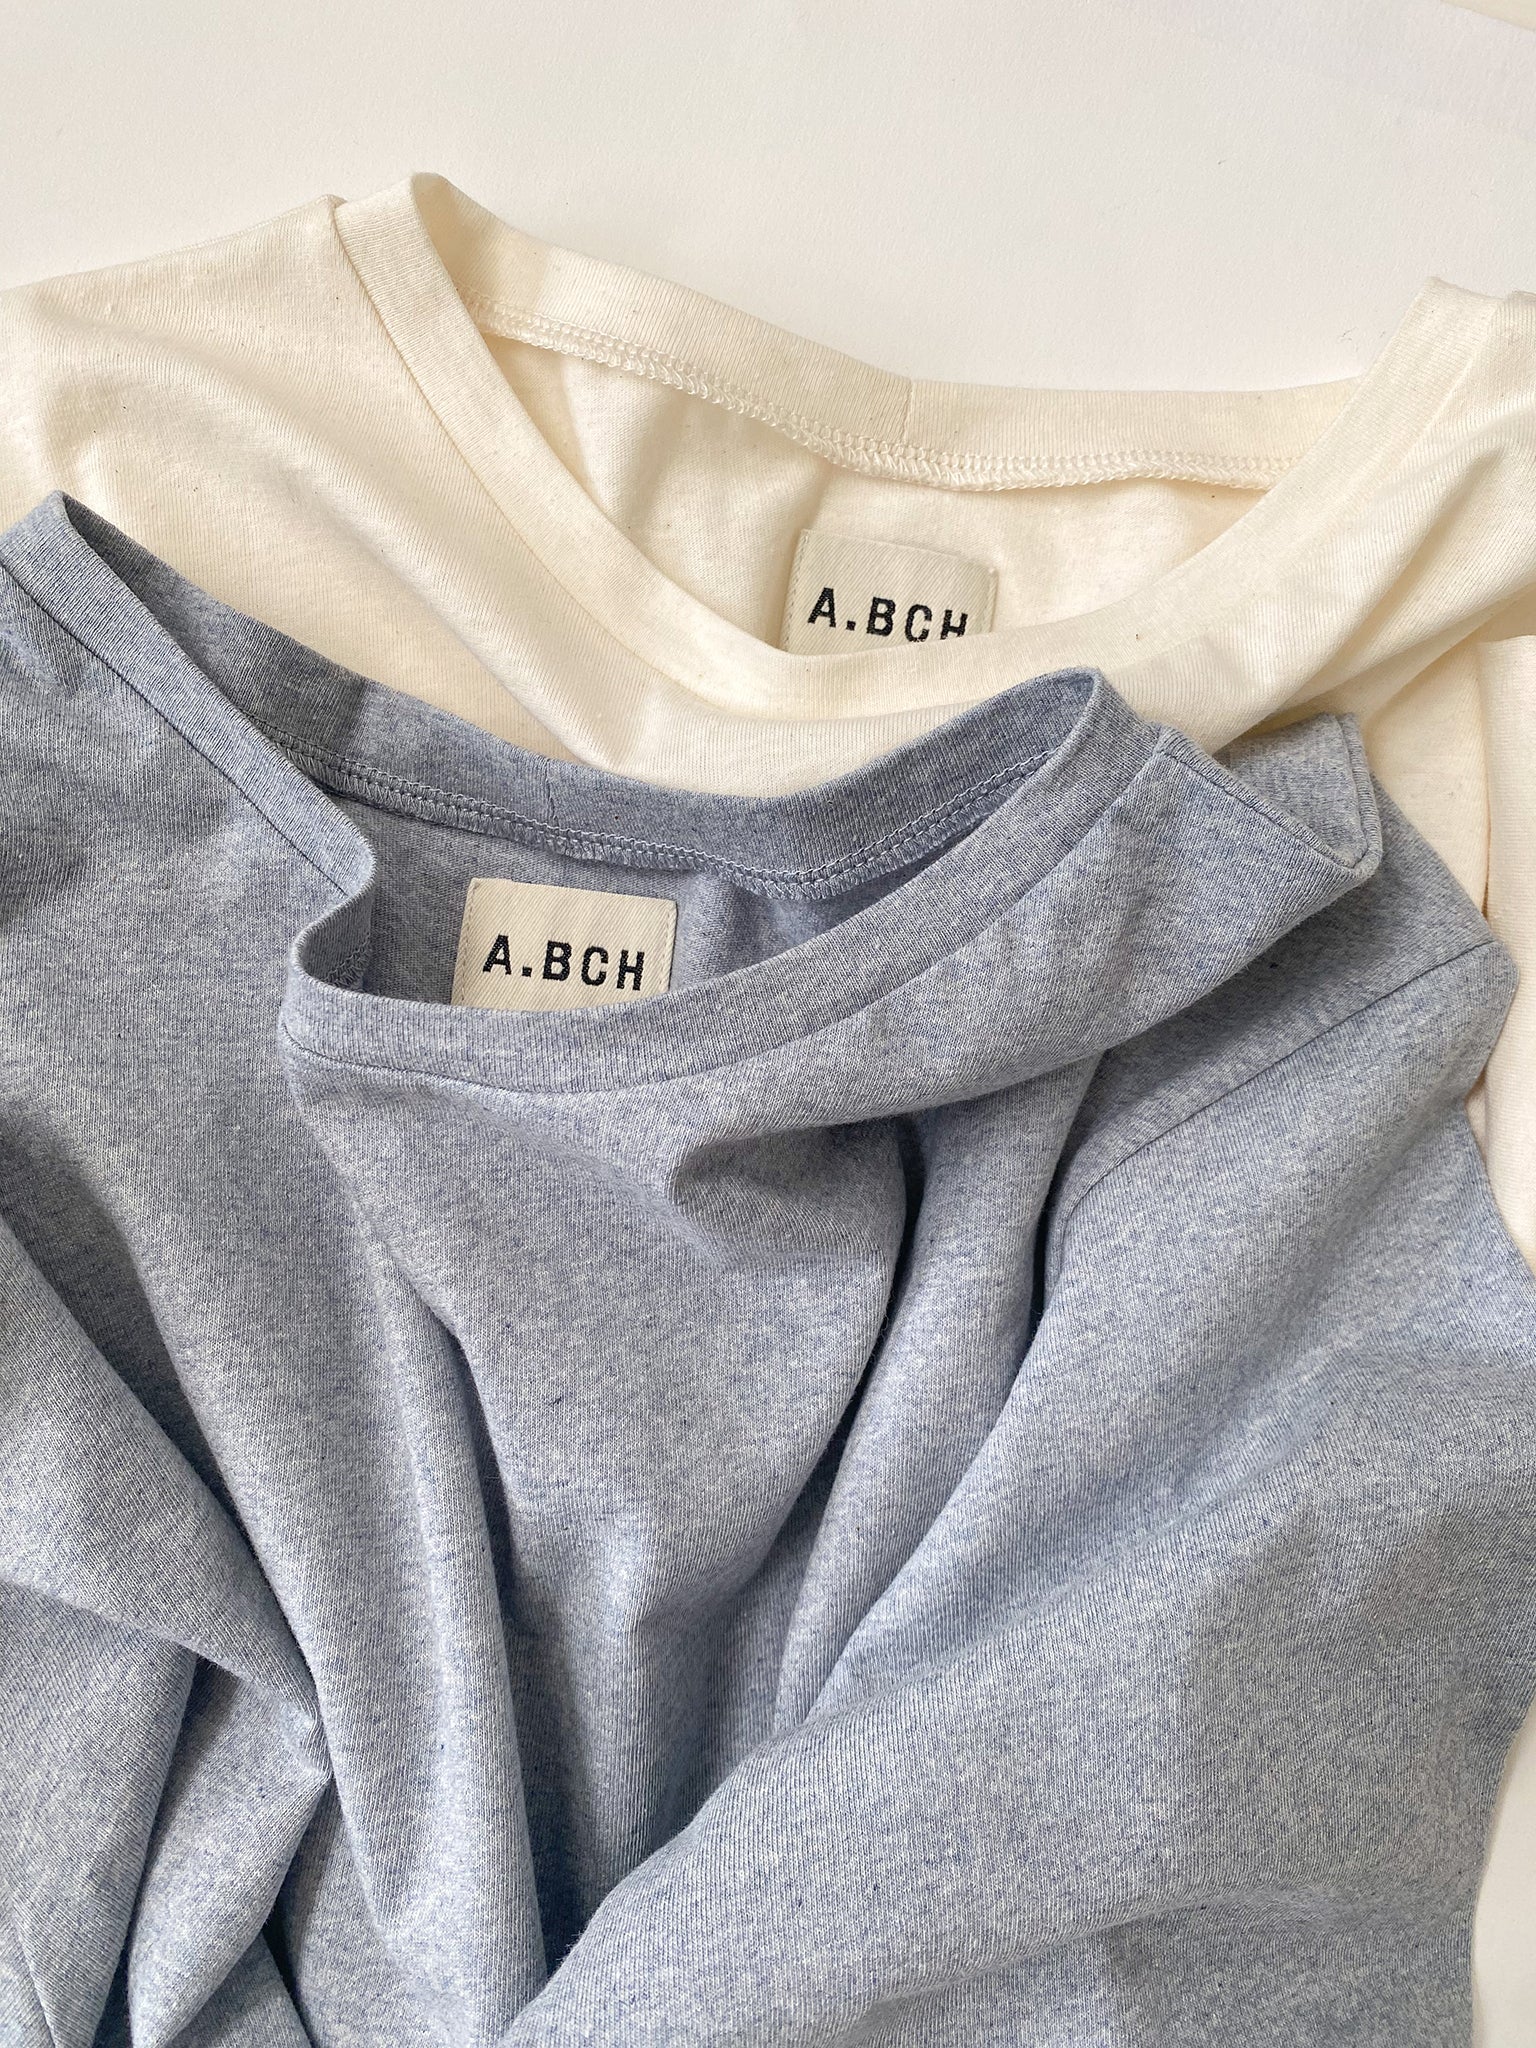 A.BCH A.58 Undyed Australian cotton and Light Blue Marle in recycled and organic cotton